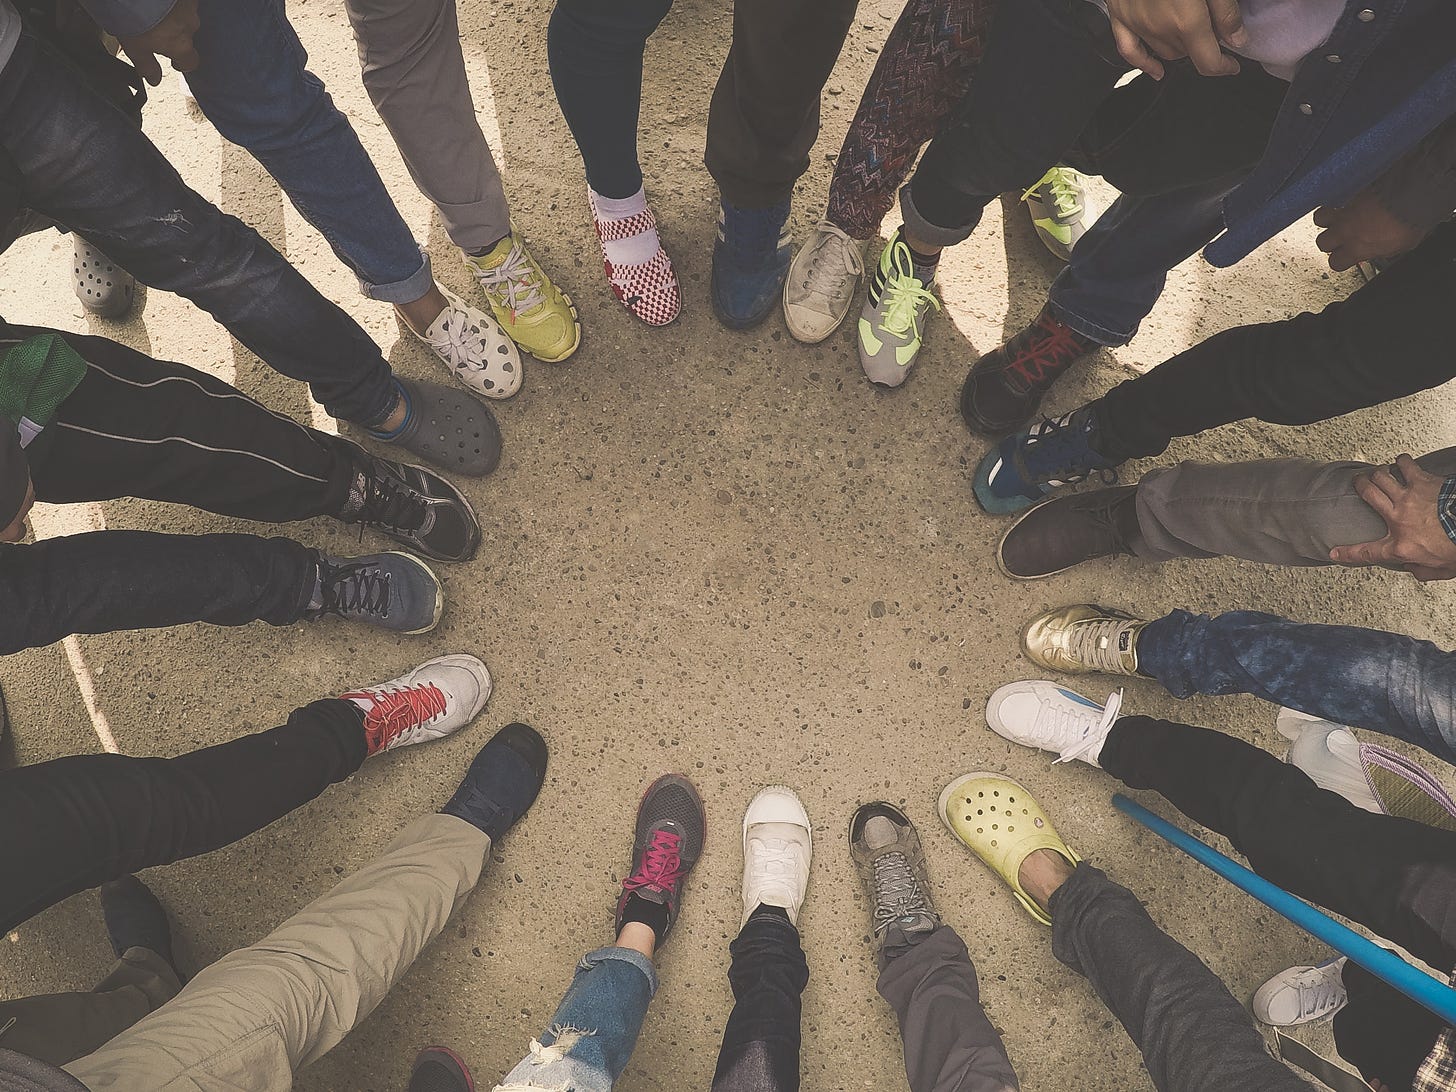 A group of people putting their feet in a circle.